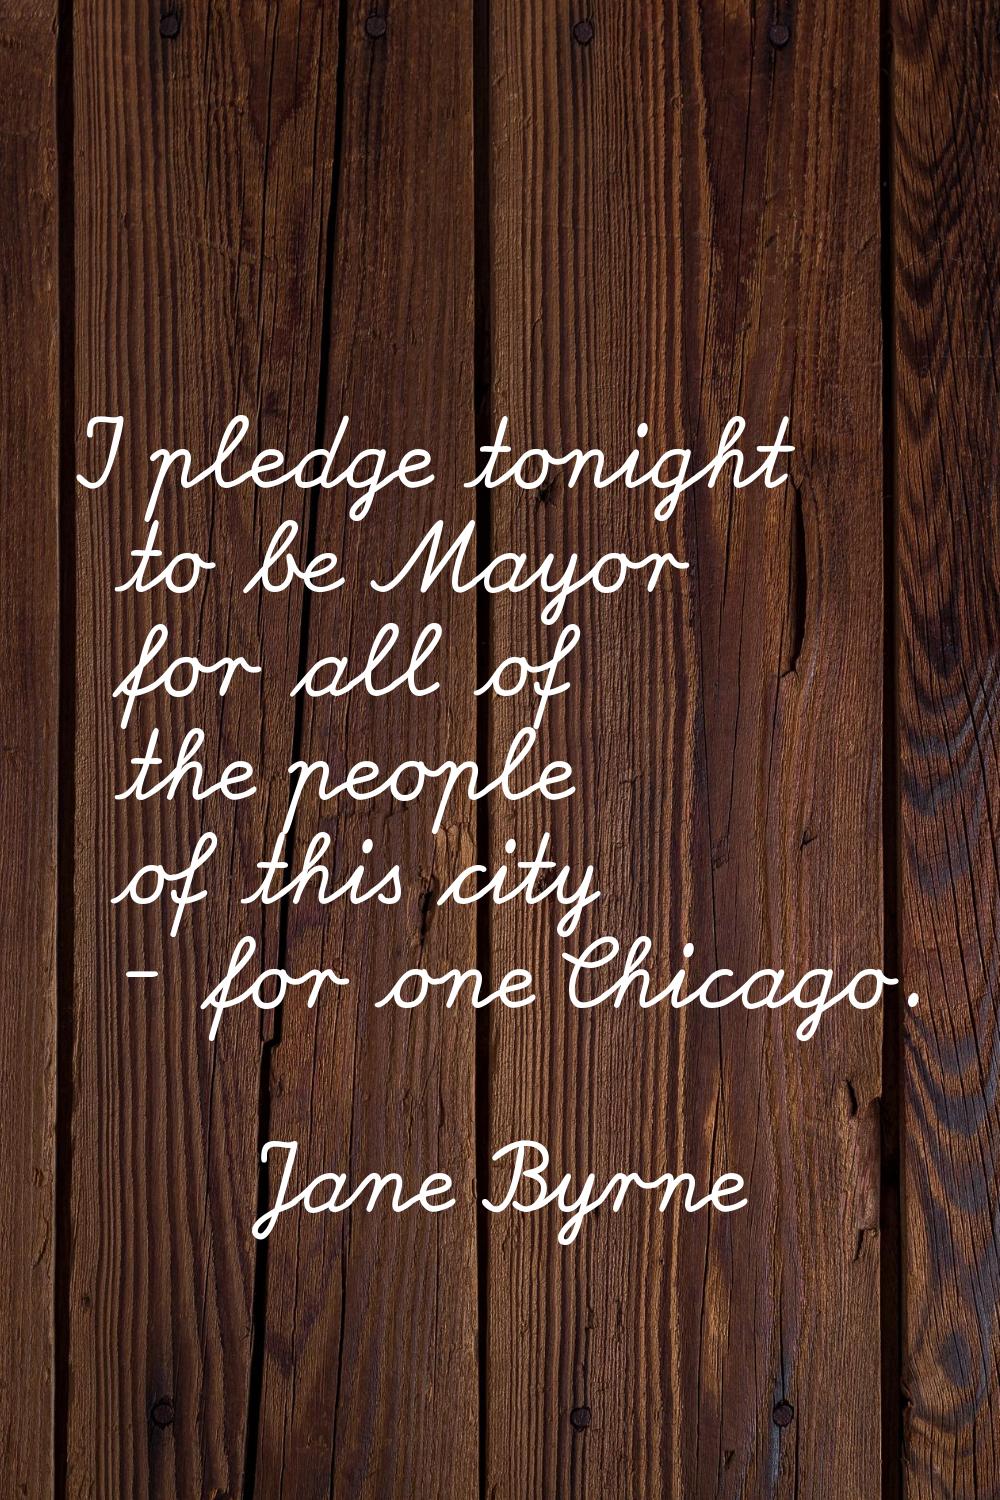 I pledge tonight to be Mayor for all of the people of this city - for one Chicago.